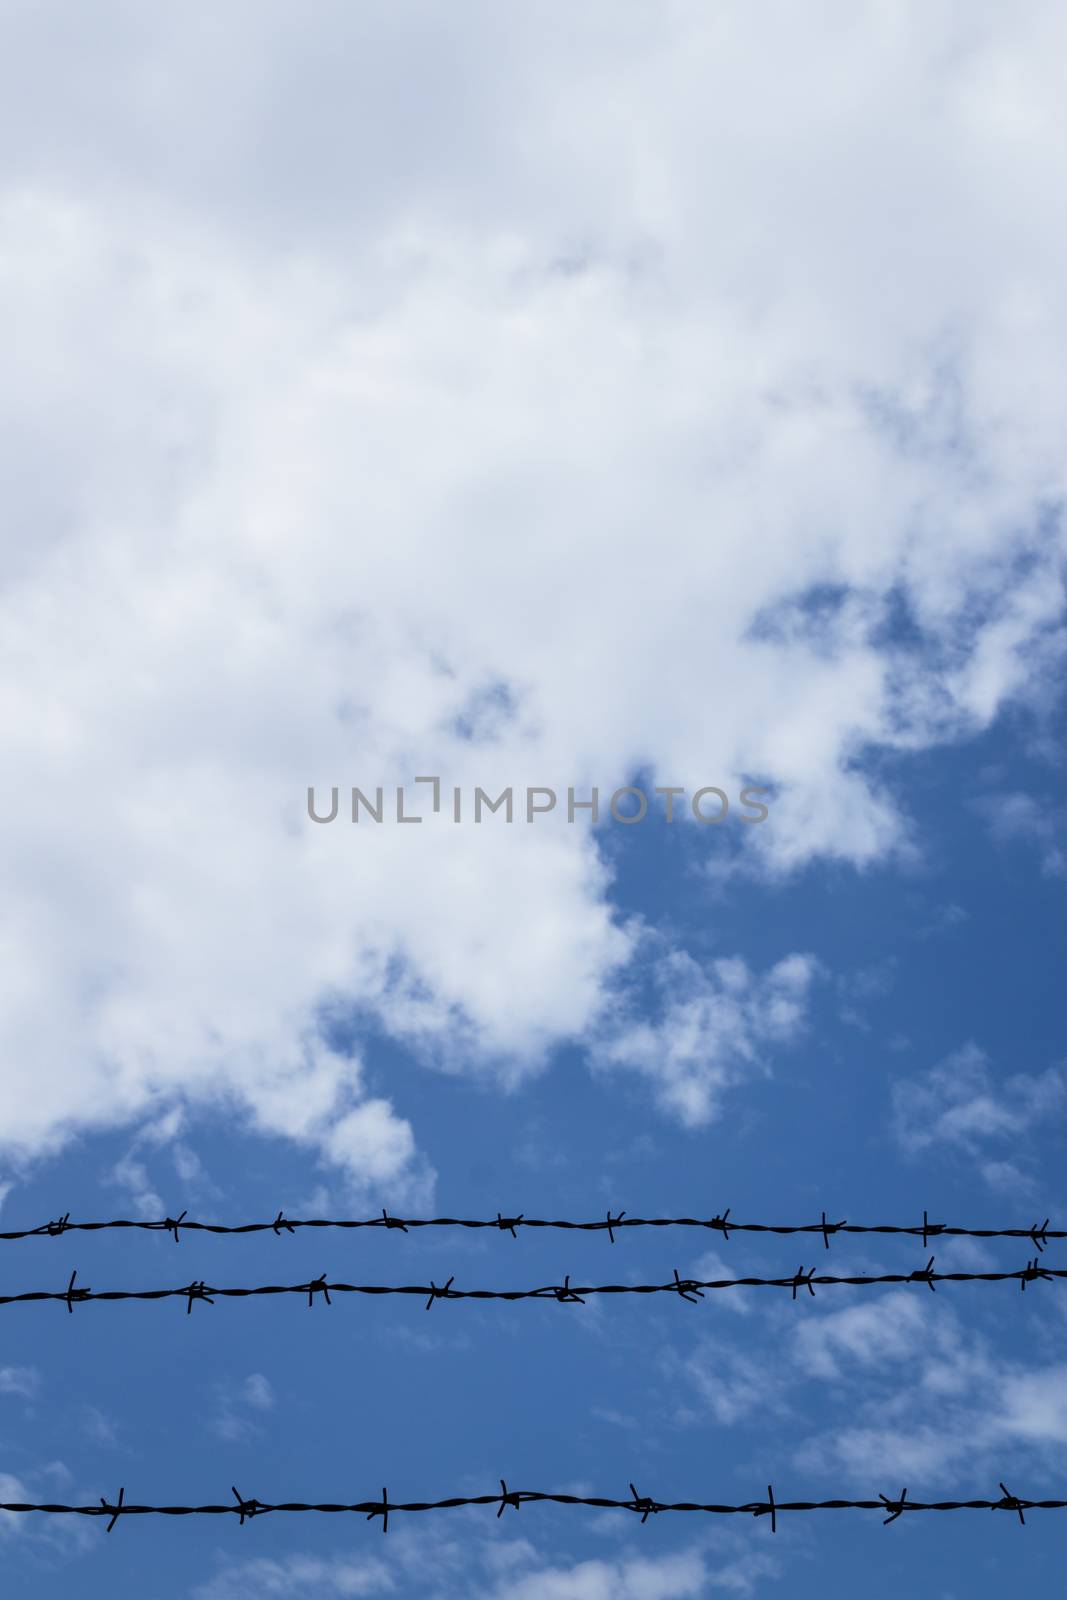 Barbed wire fence with blue sky and clouds in the background.